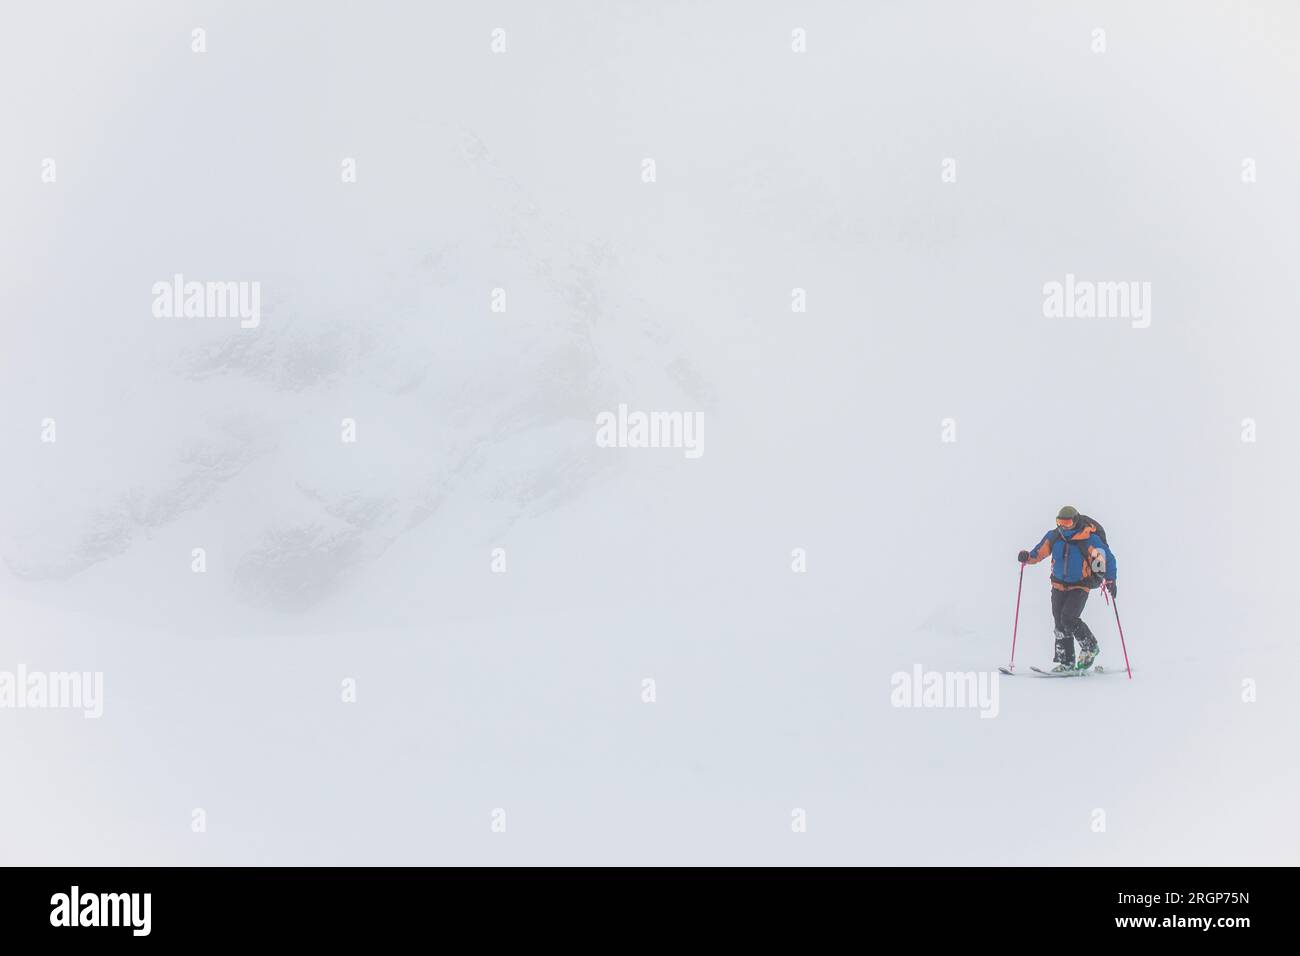 Man ski touring in white out conditions, poor visibility Stock Photo